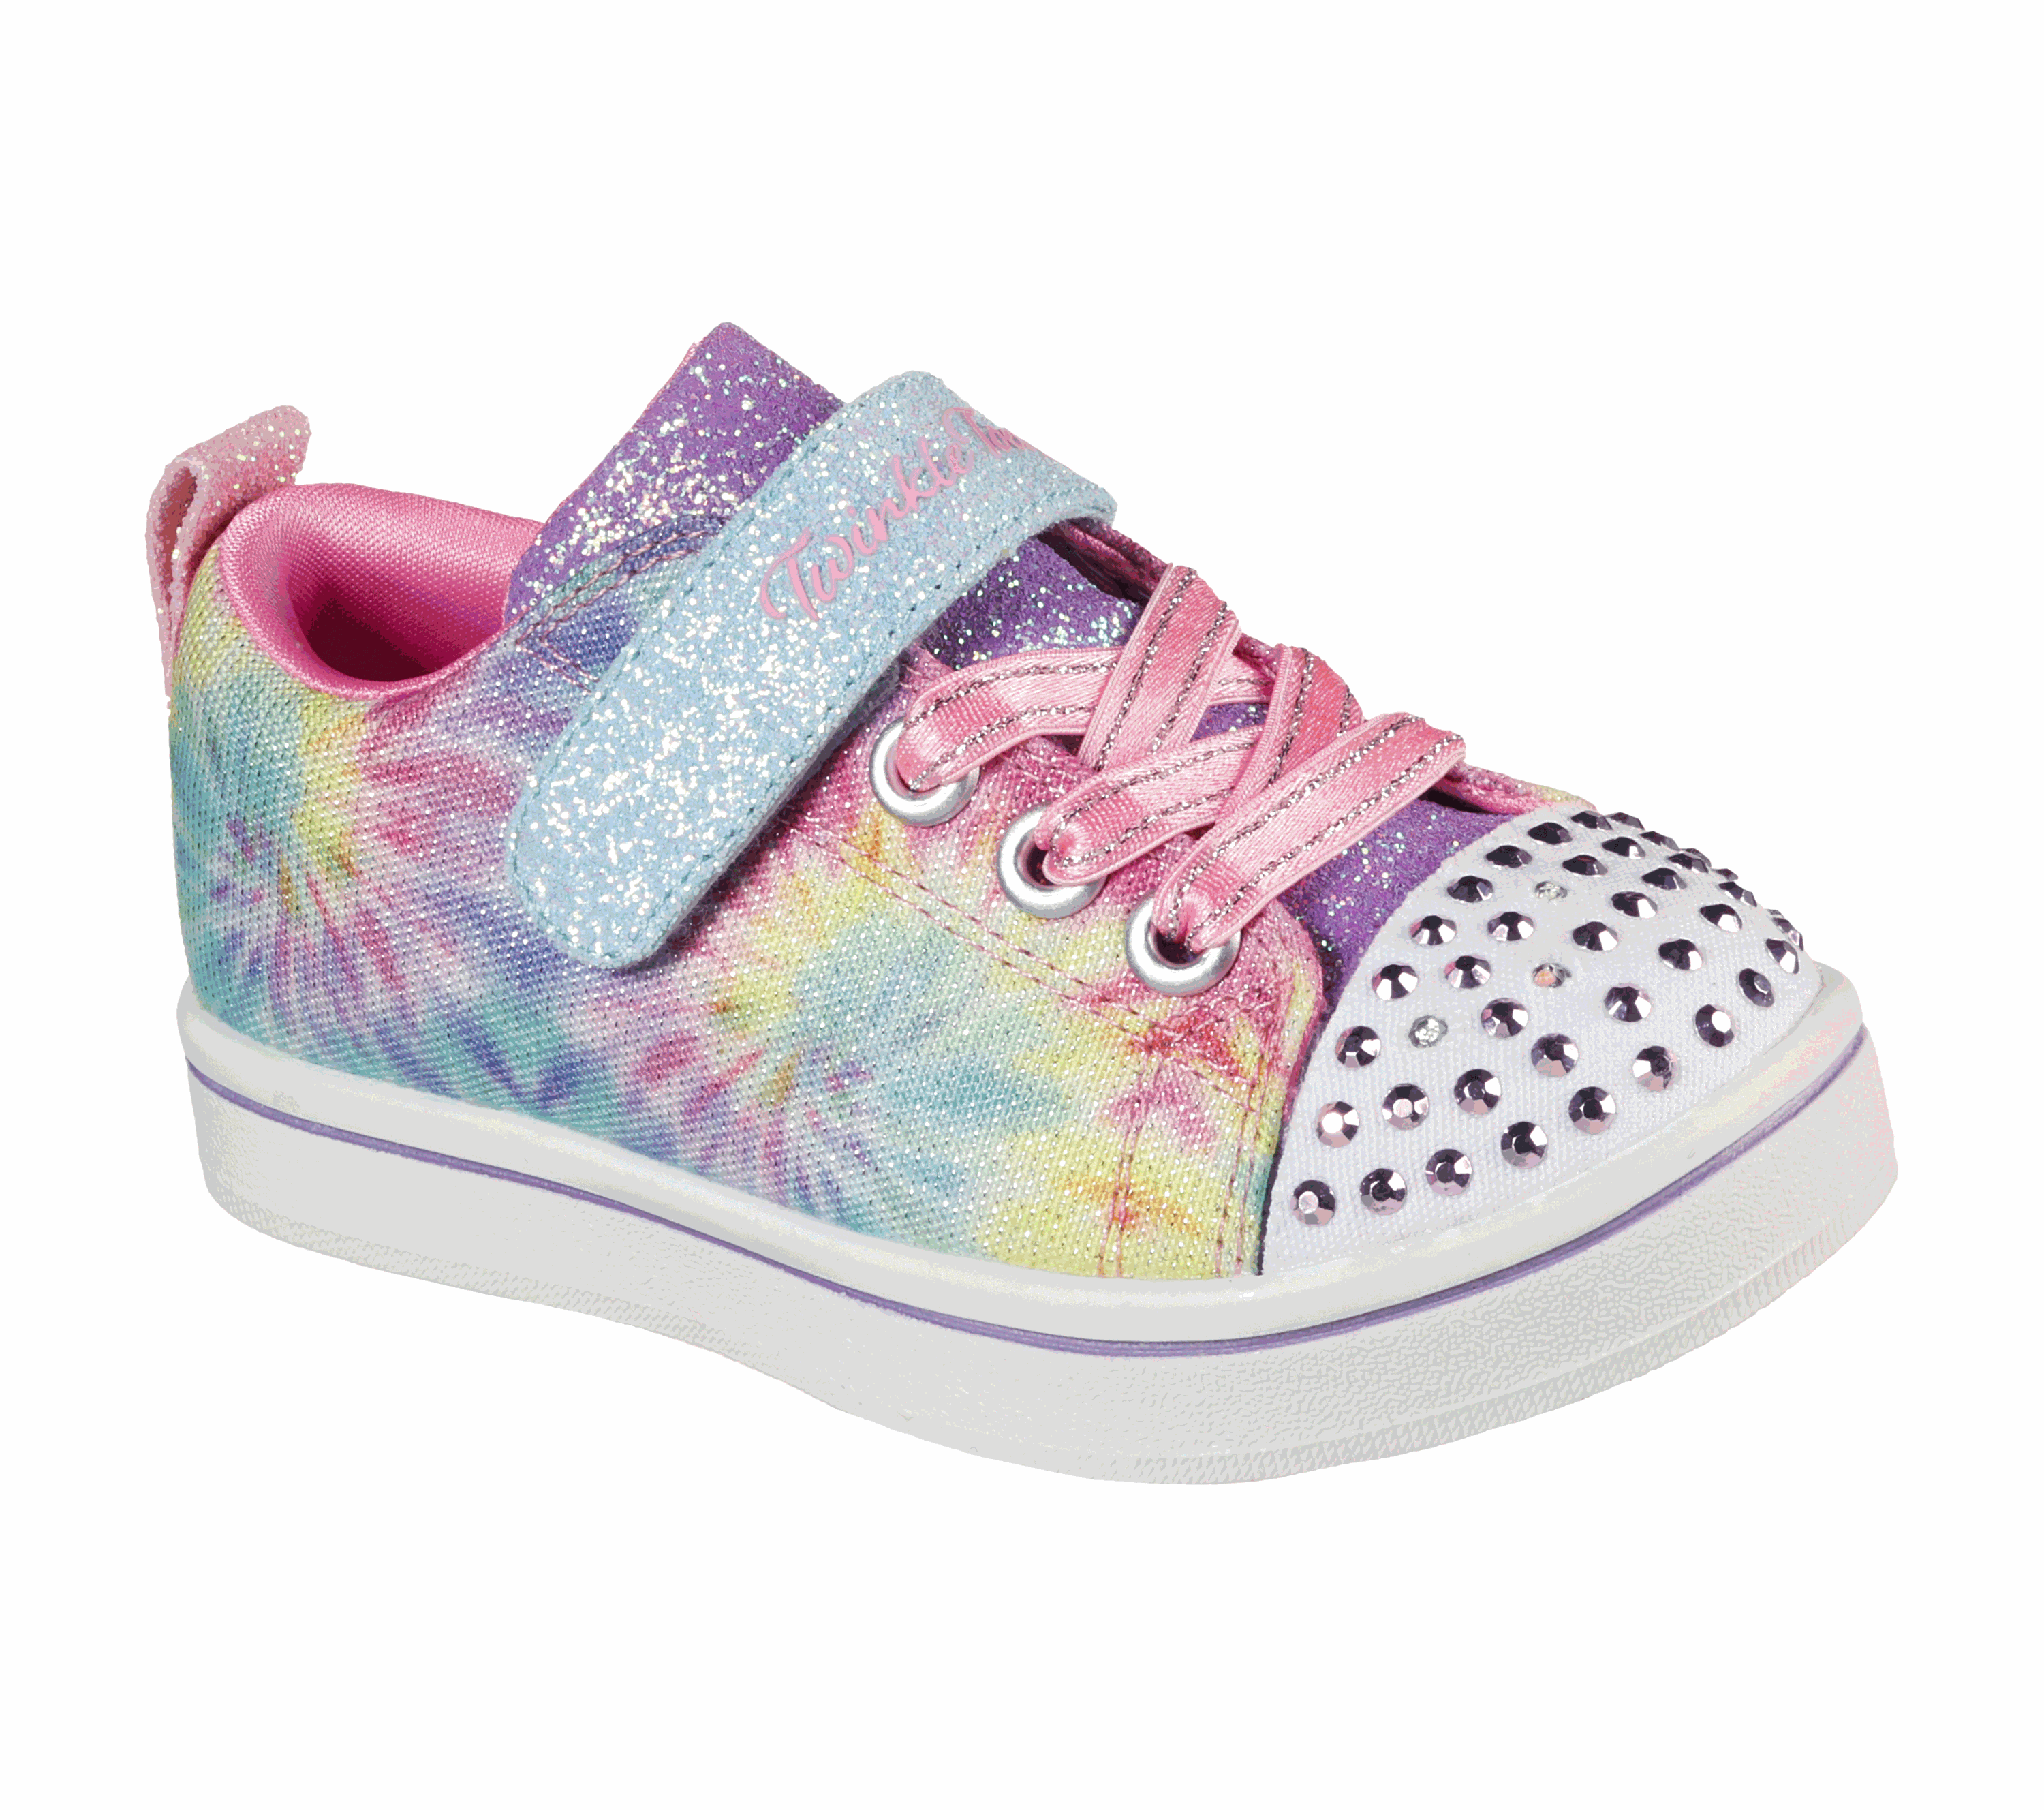 skechers twinkle toes toddler size 9